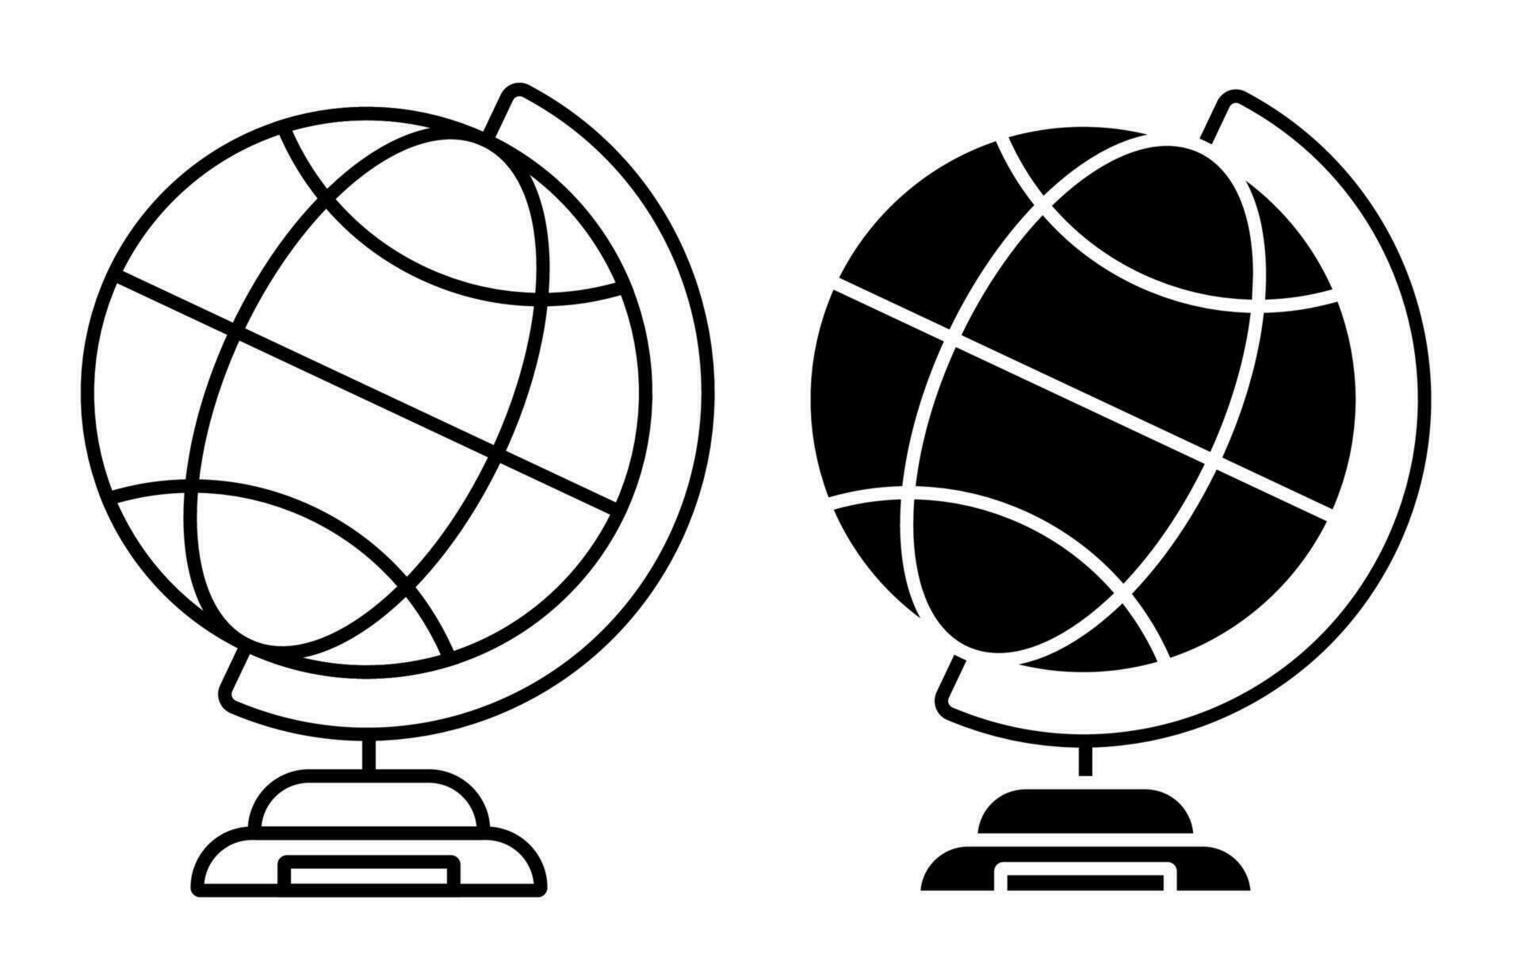 school globe on stand icon. Studying geography at school. Planet earth model for training. Simple black and white vector